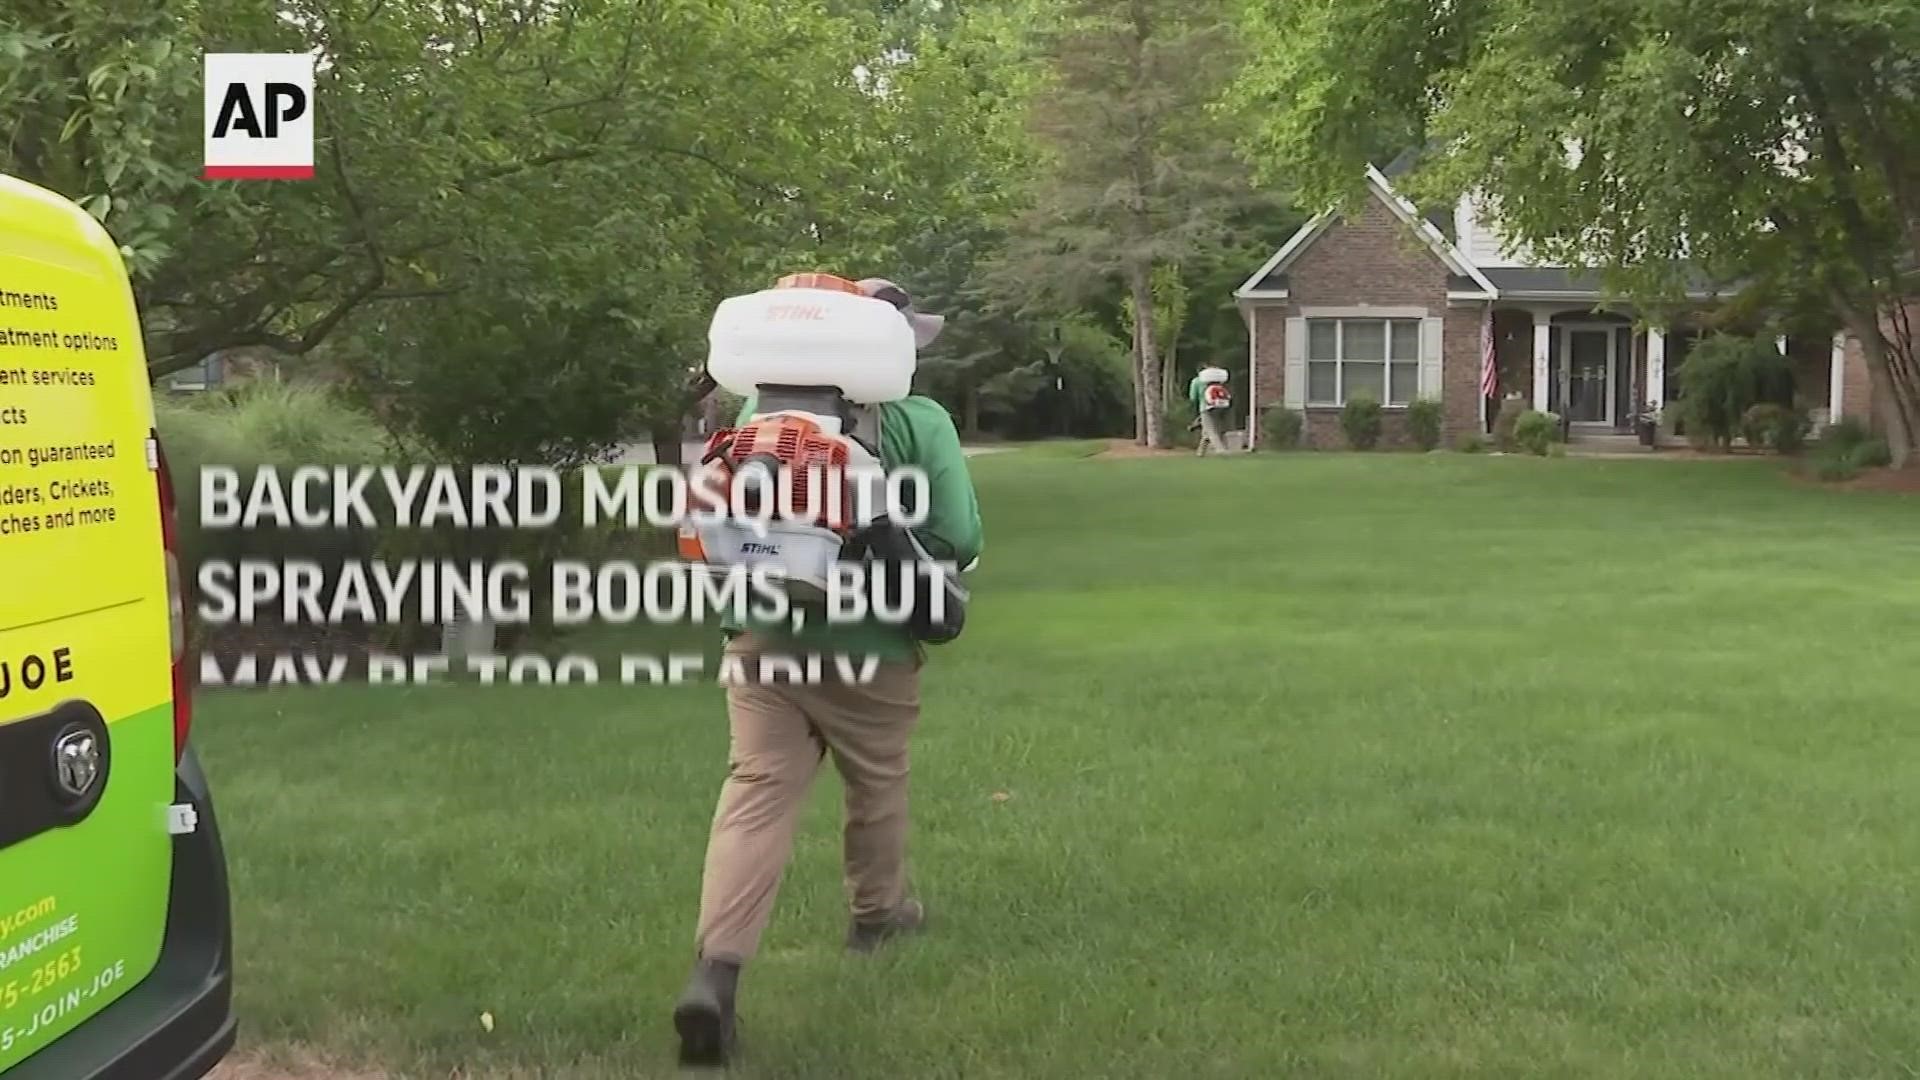 Mosquito spraying companies, which have multiplied with the surging demand, say they try to minimize pollinator losses but acknowledge there's collateral damage.